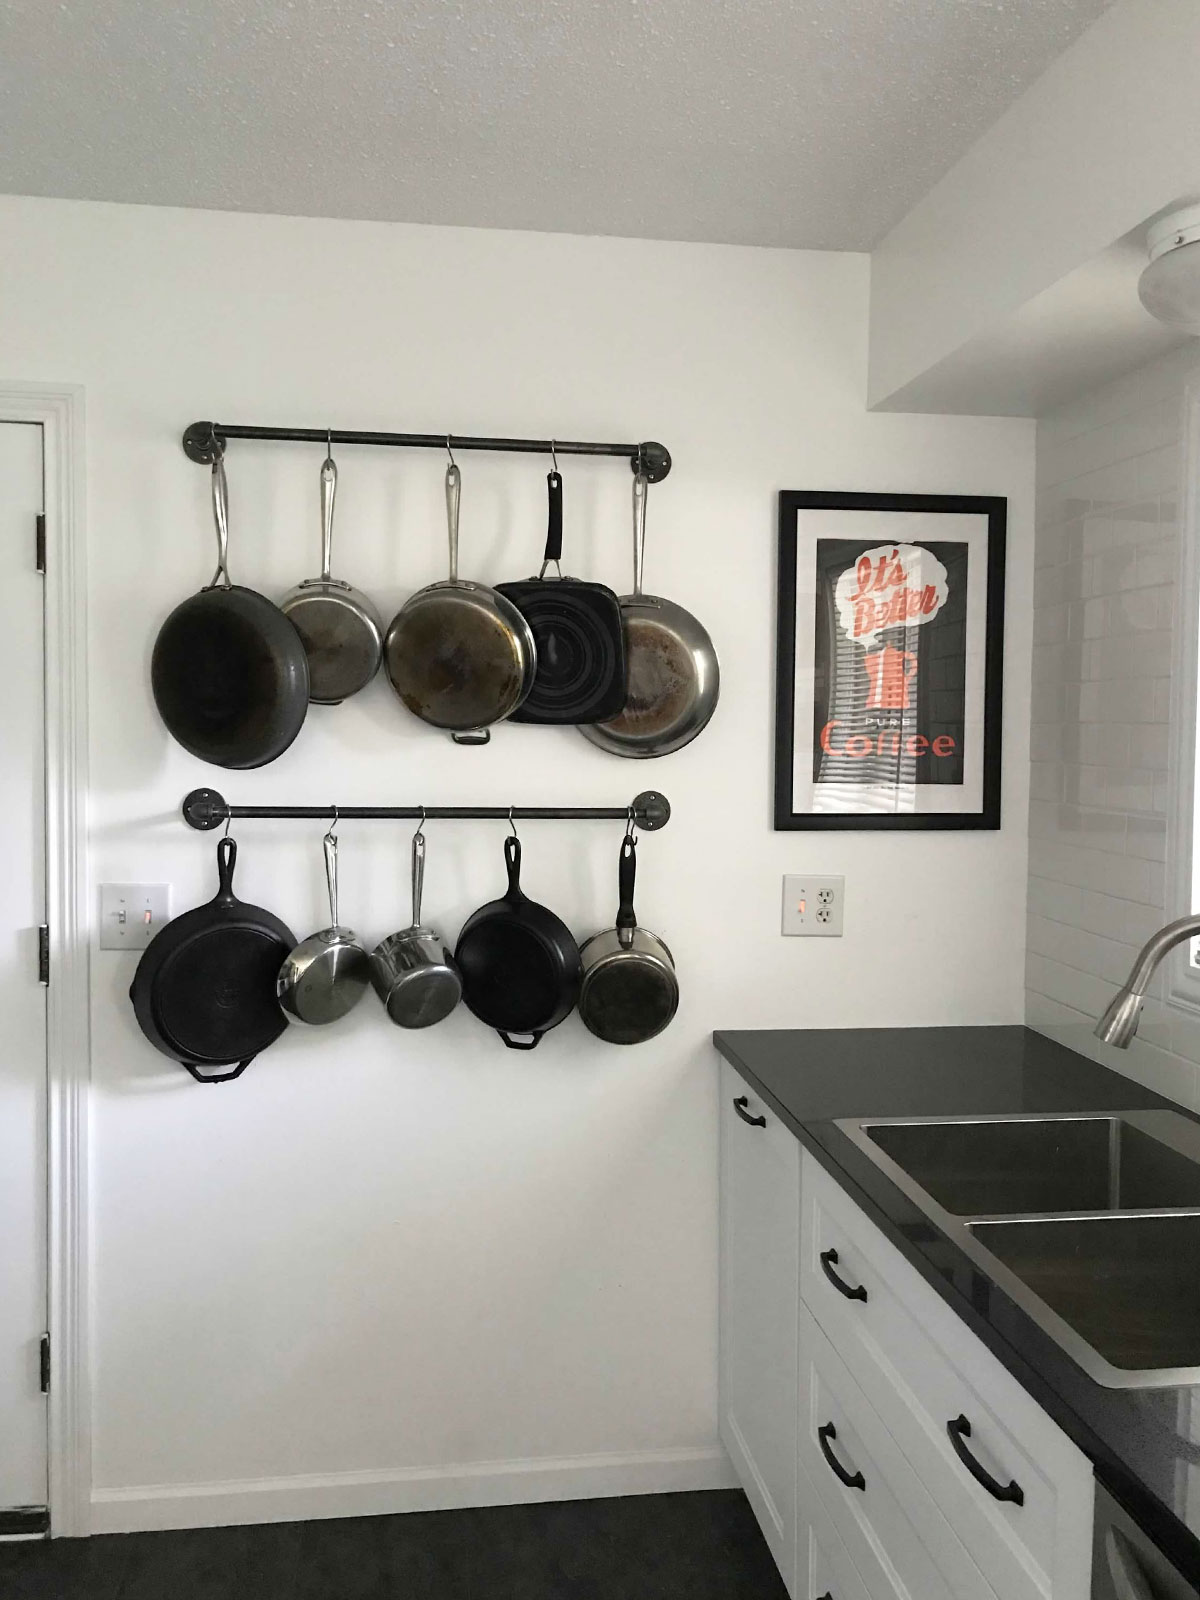 A pot rack against a white wall in a white and black kitchen displays a variety of pans and pots.